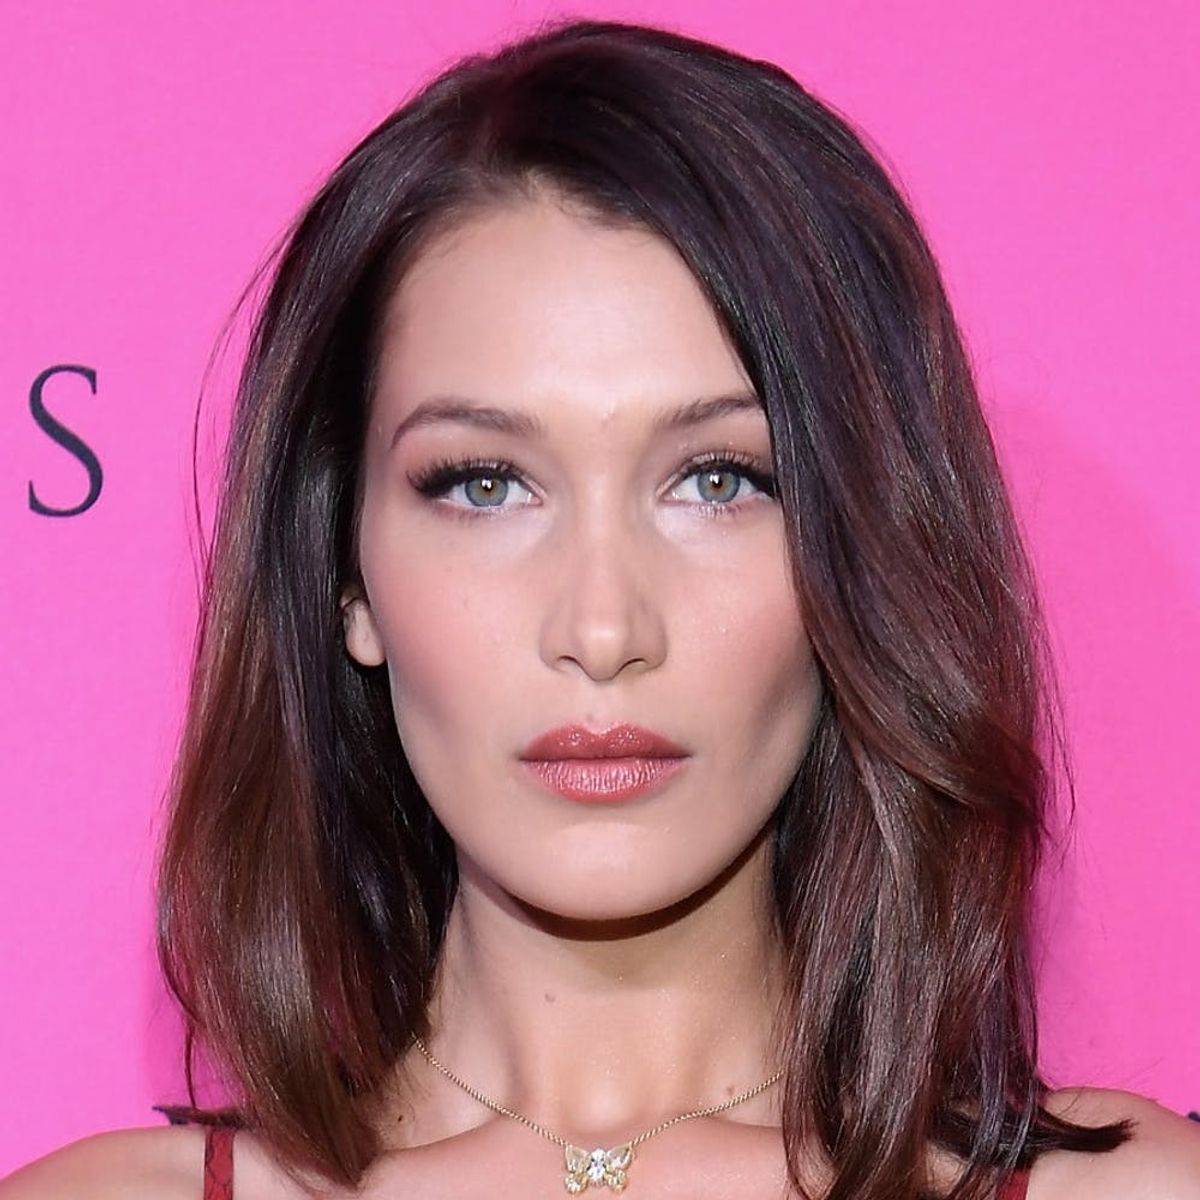 Bella Hadid Just Debuted a Set of Curled Ringlets That Will Make You Do a Double Take